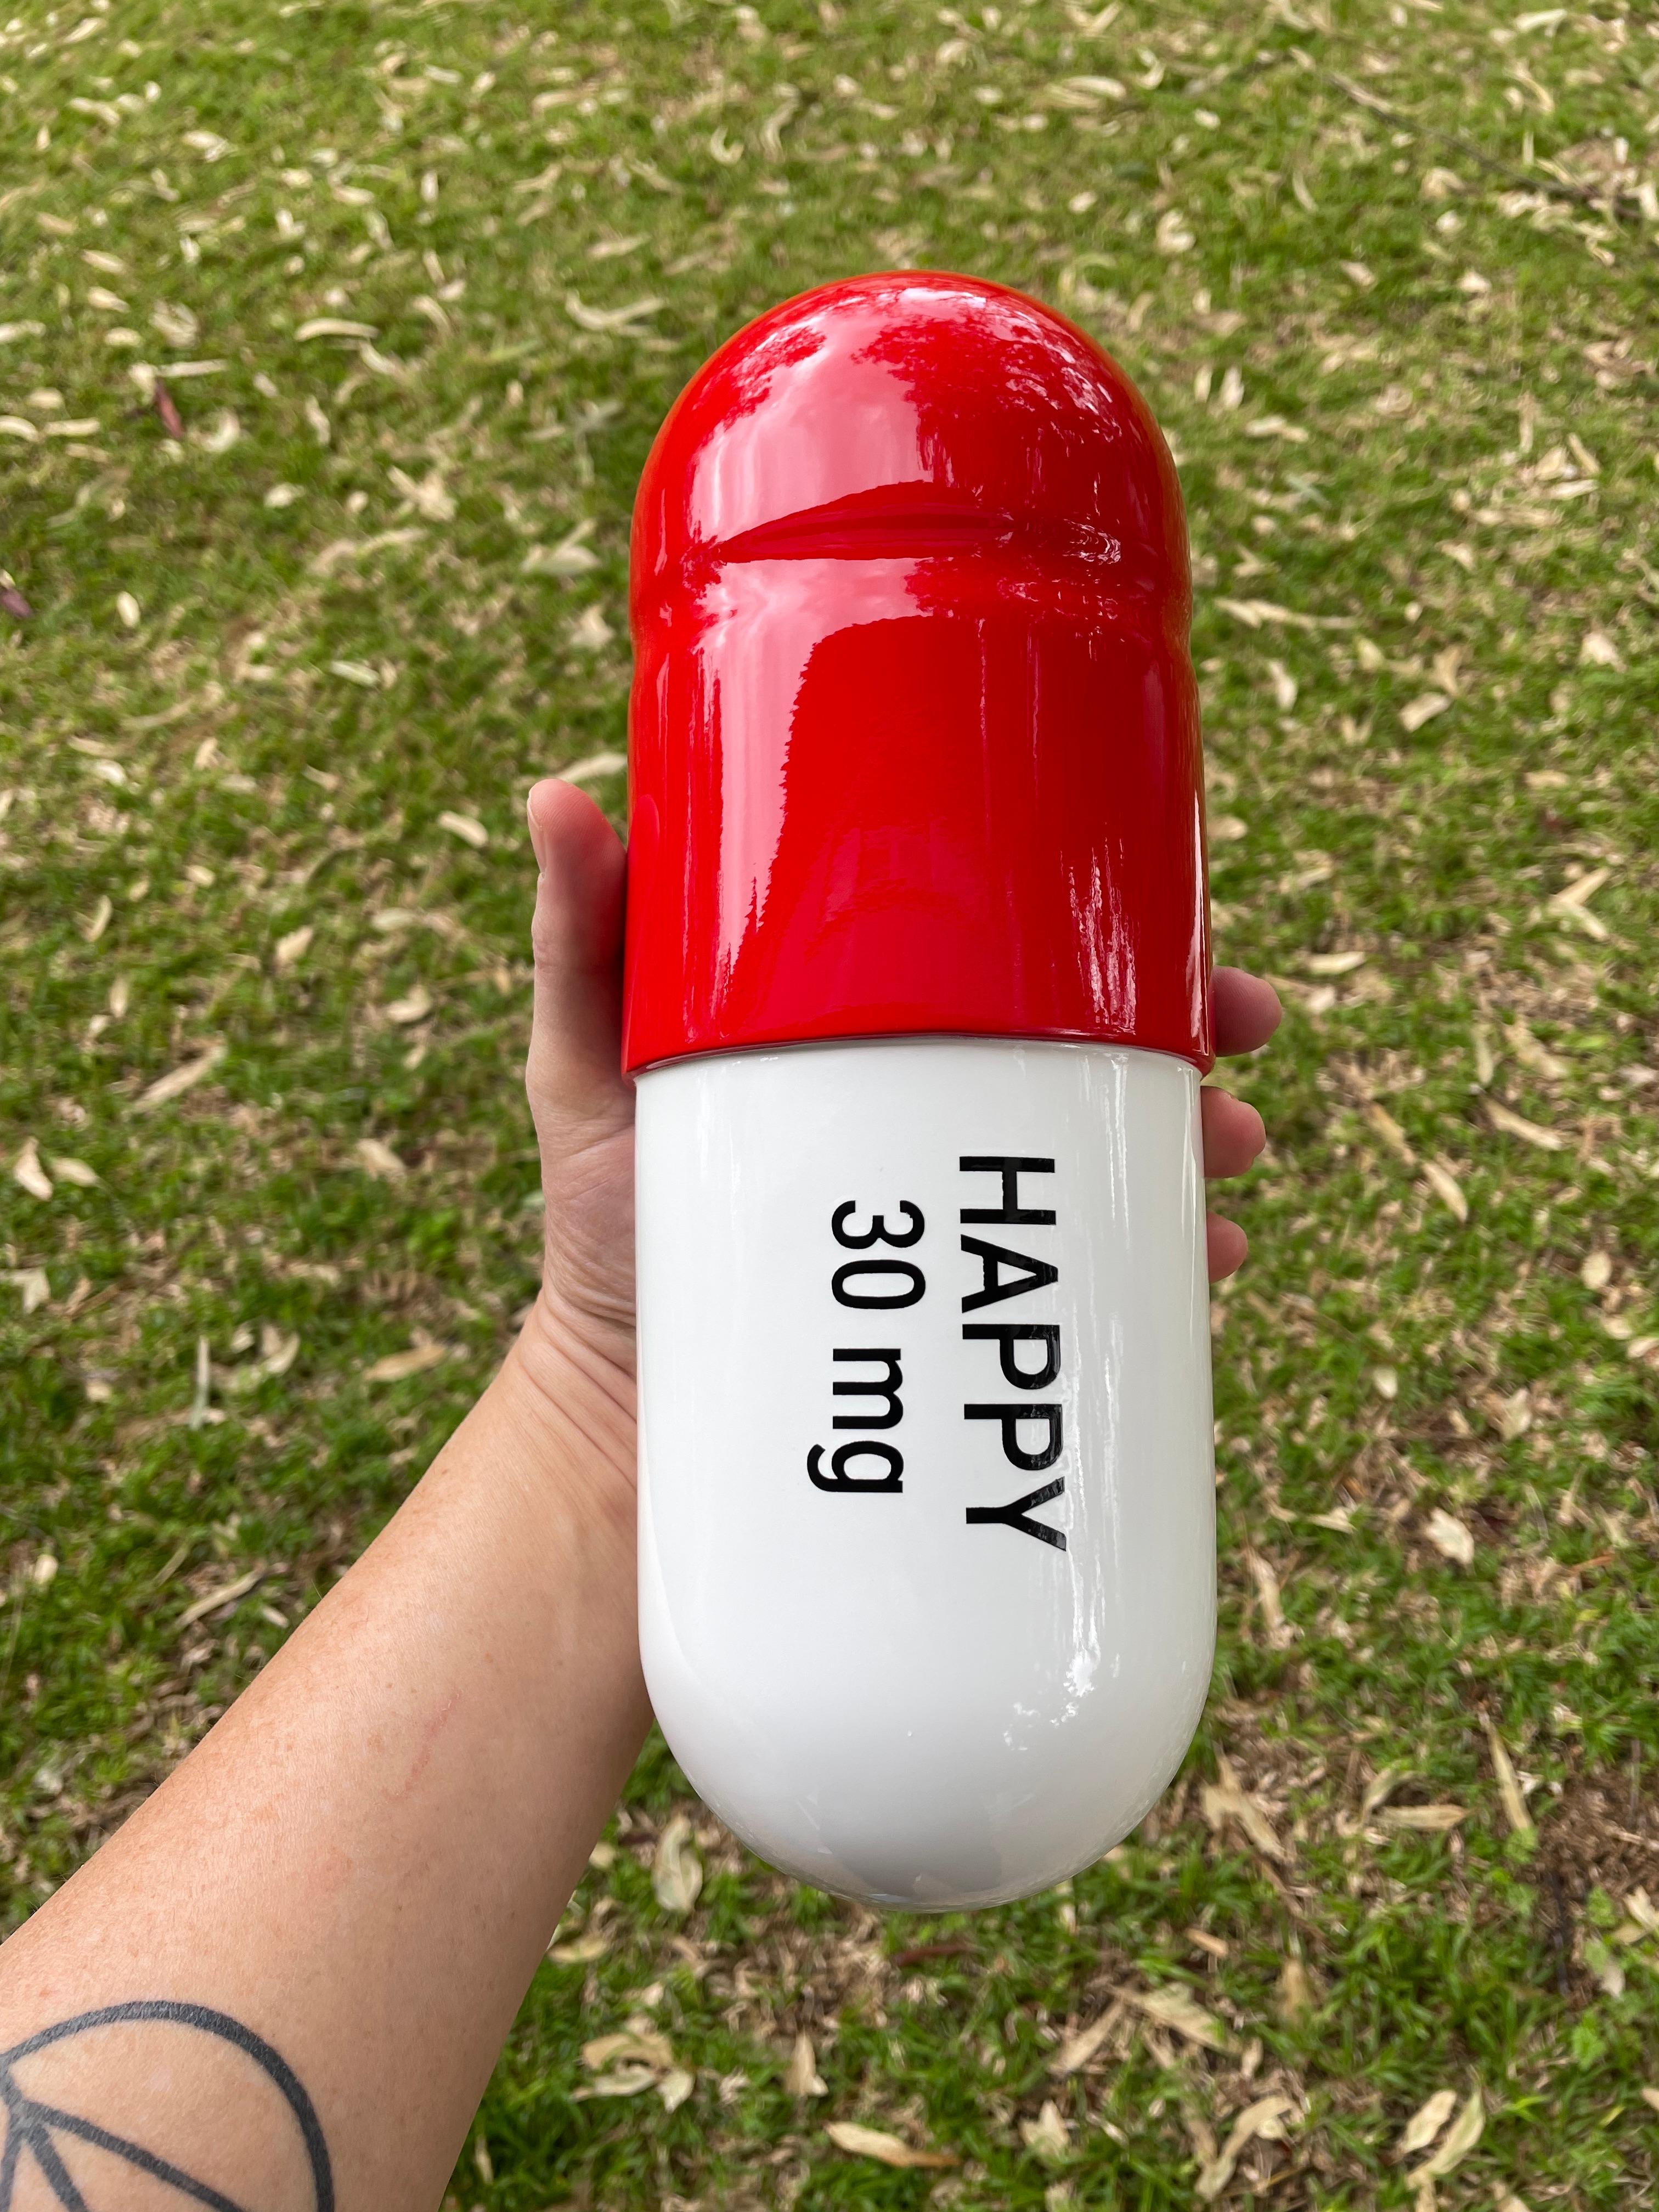 30 mg Large Happy pill (Red and White) - figurative sculpture - Pop Art Sculpture by Tal Nehoray